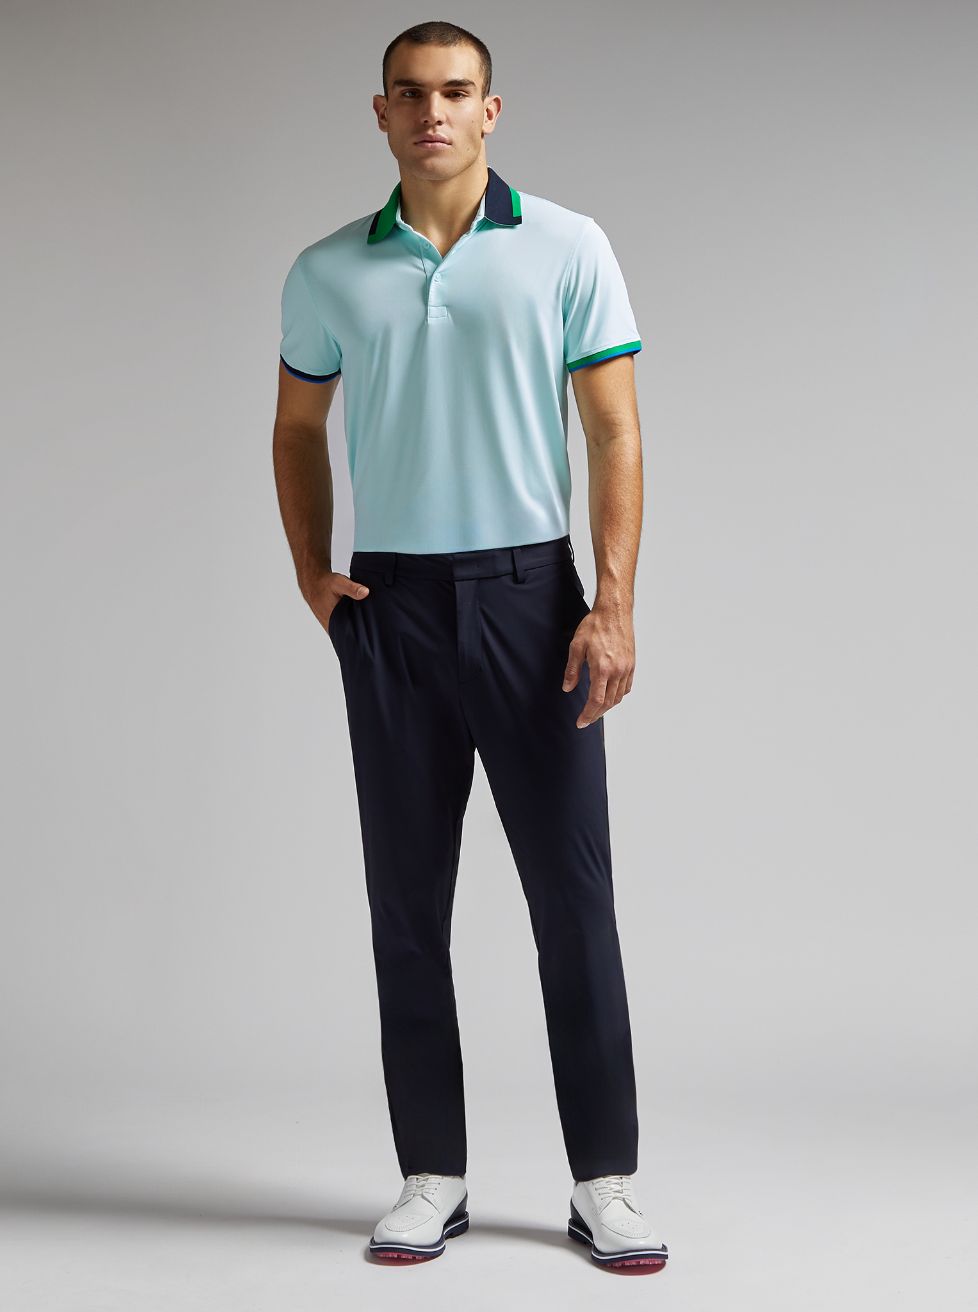 Learn more about Warp Knit Straight Leg<br> Pant